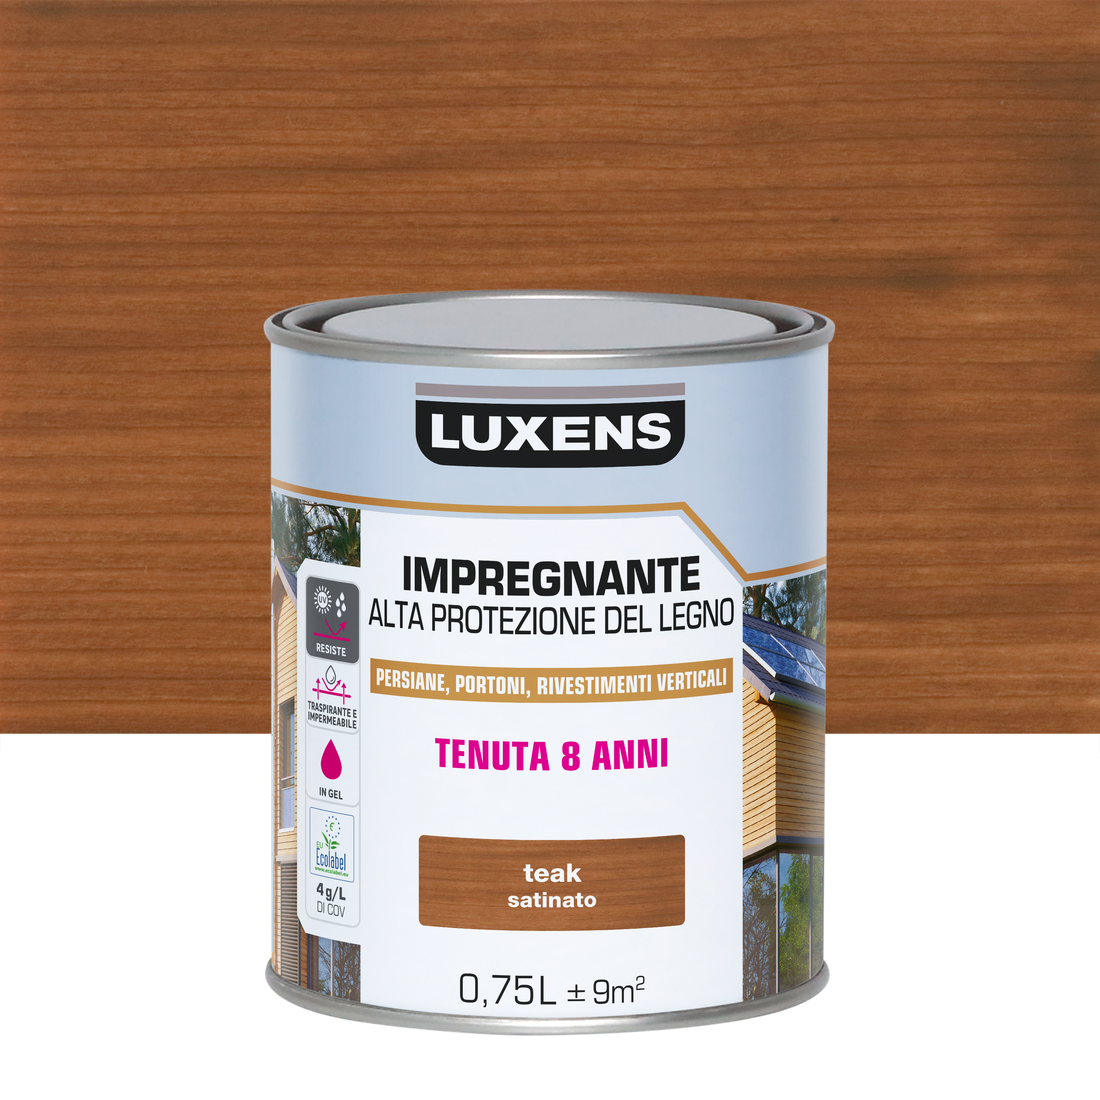 LUXENS HIGH PROTECTION WATER-BASED TEAK WOOD PRESERVATIVE 750 ML